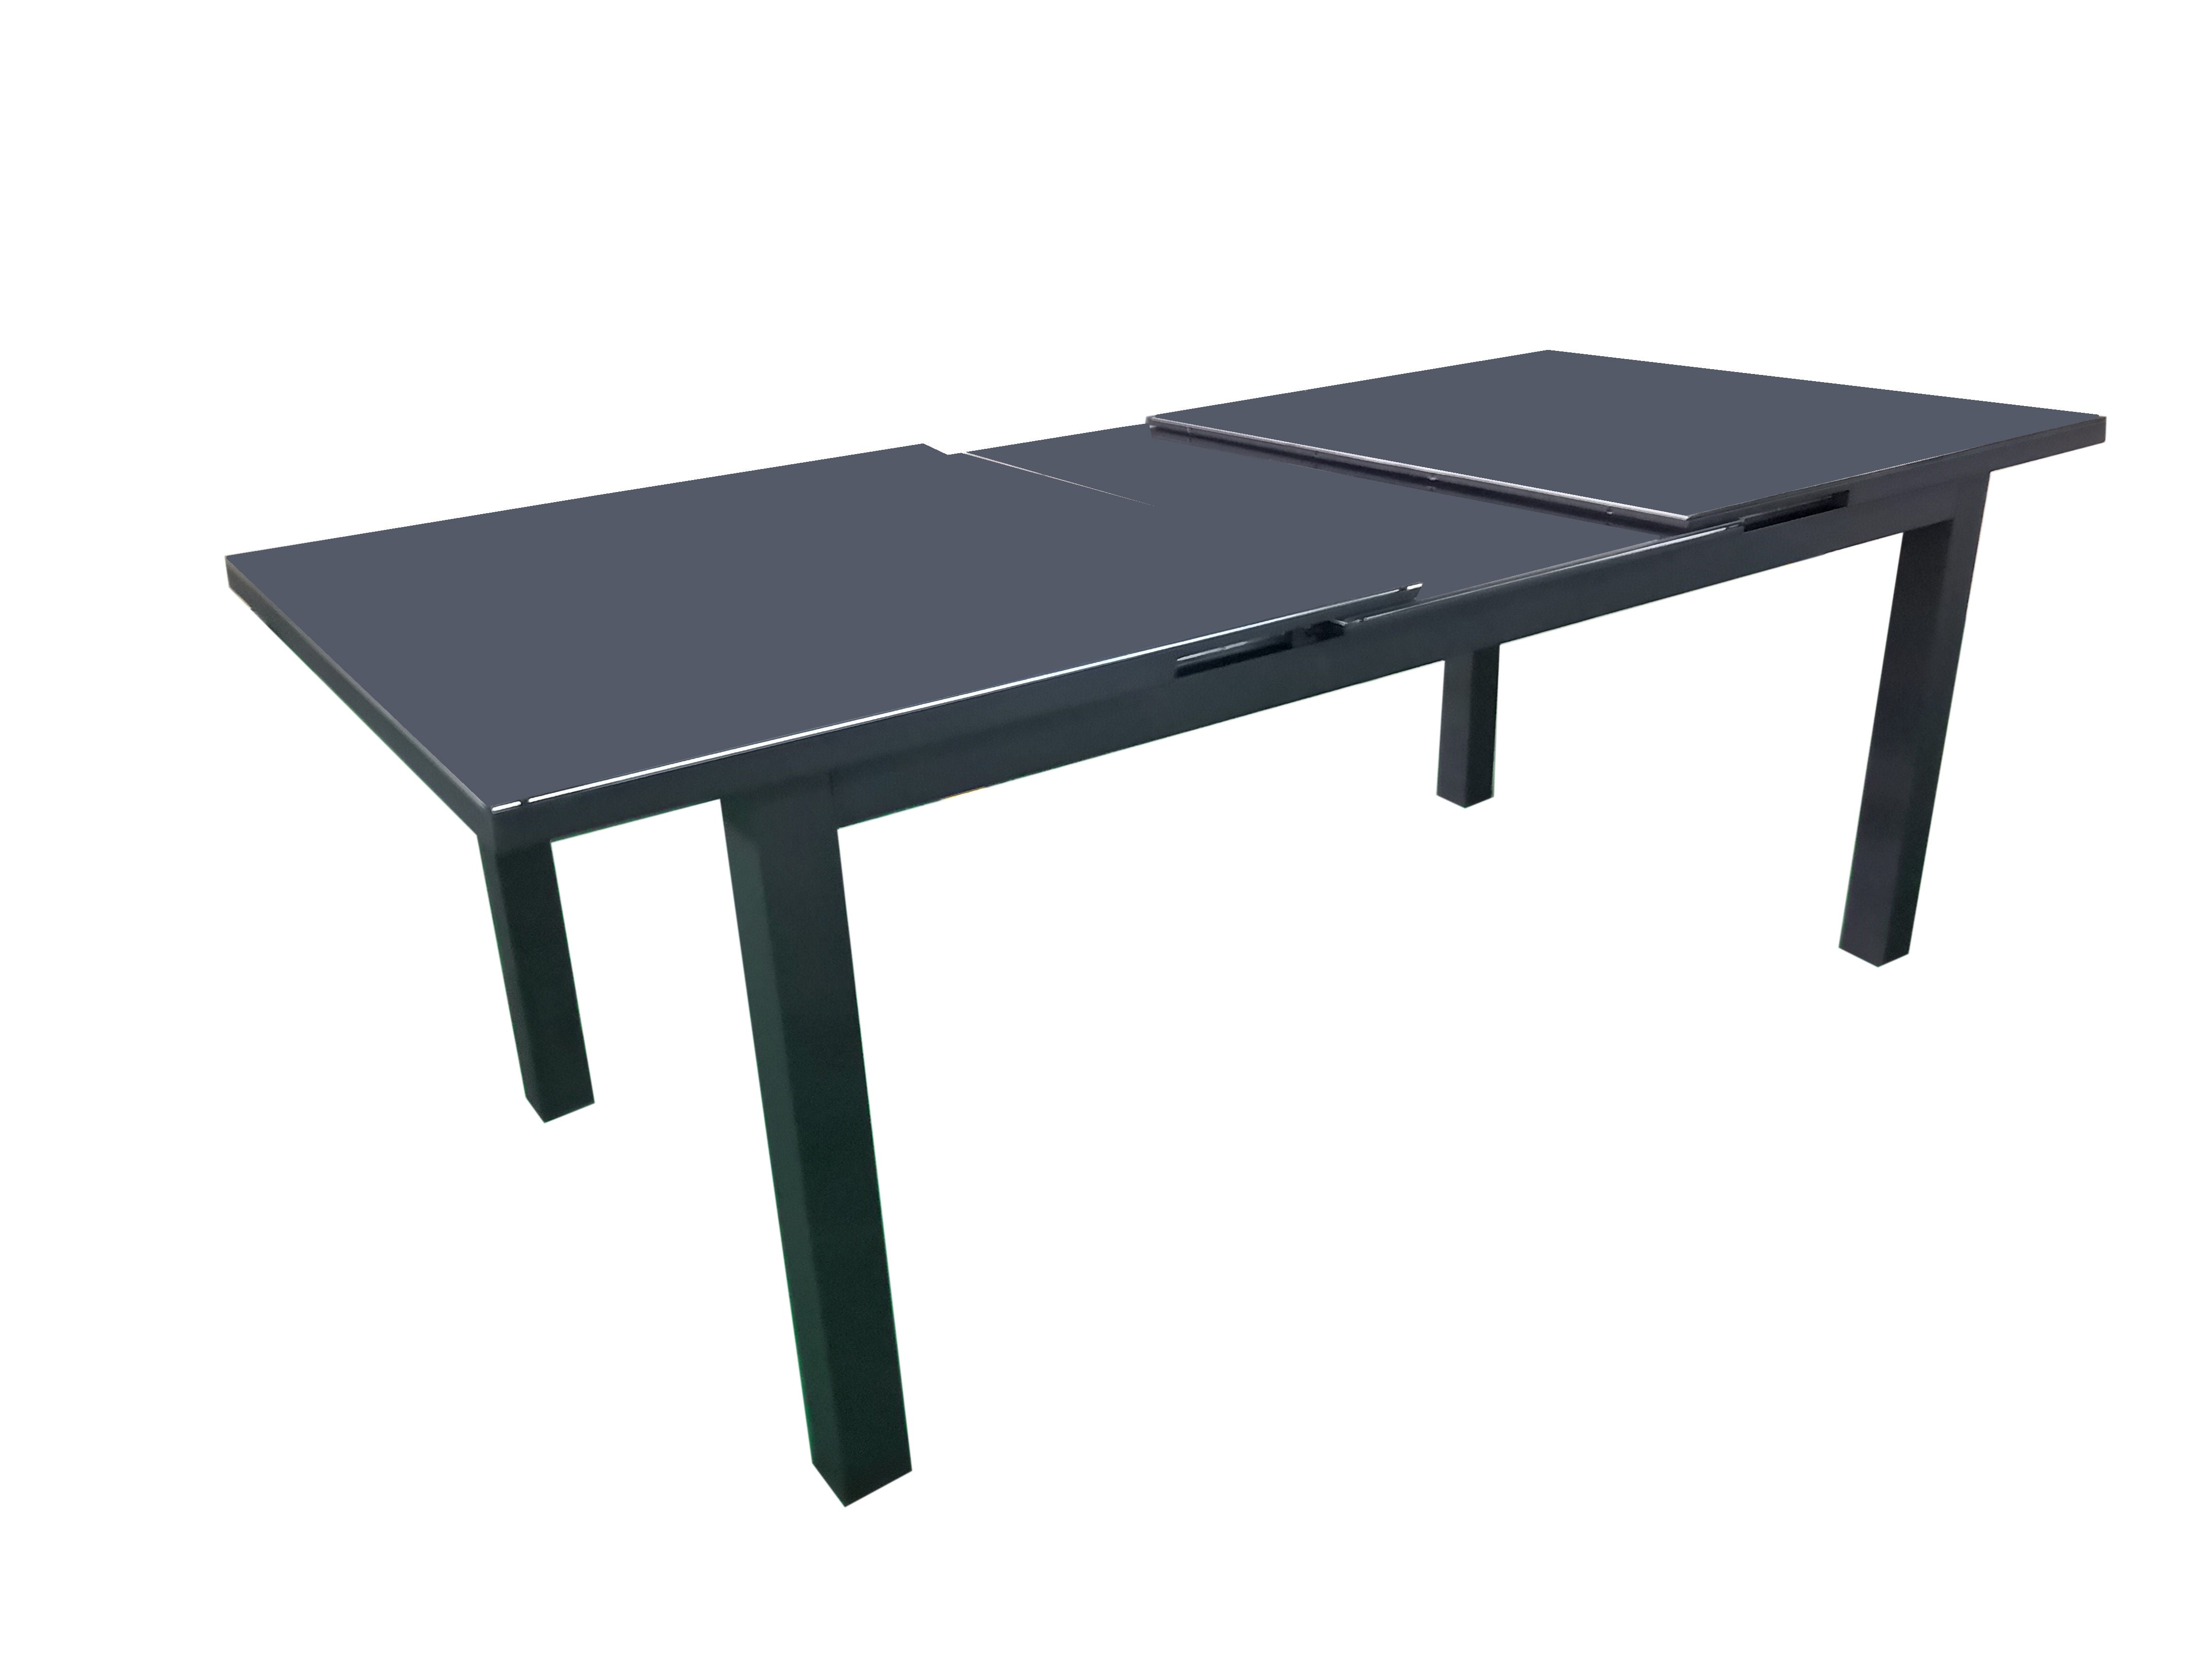 MOSS MOSS-102NC - Akumal Collection, Black matte aluminum extendable table with black aluminum slats and up/down sliding mechanism 71"(95" with extension) x 39" x H 29.1"